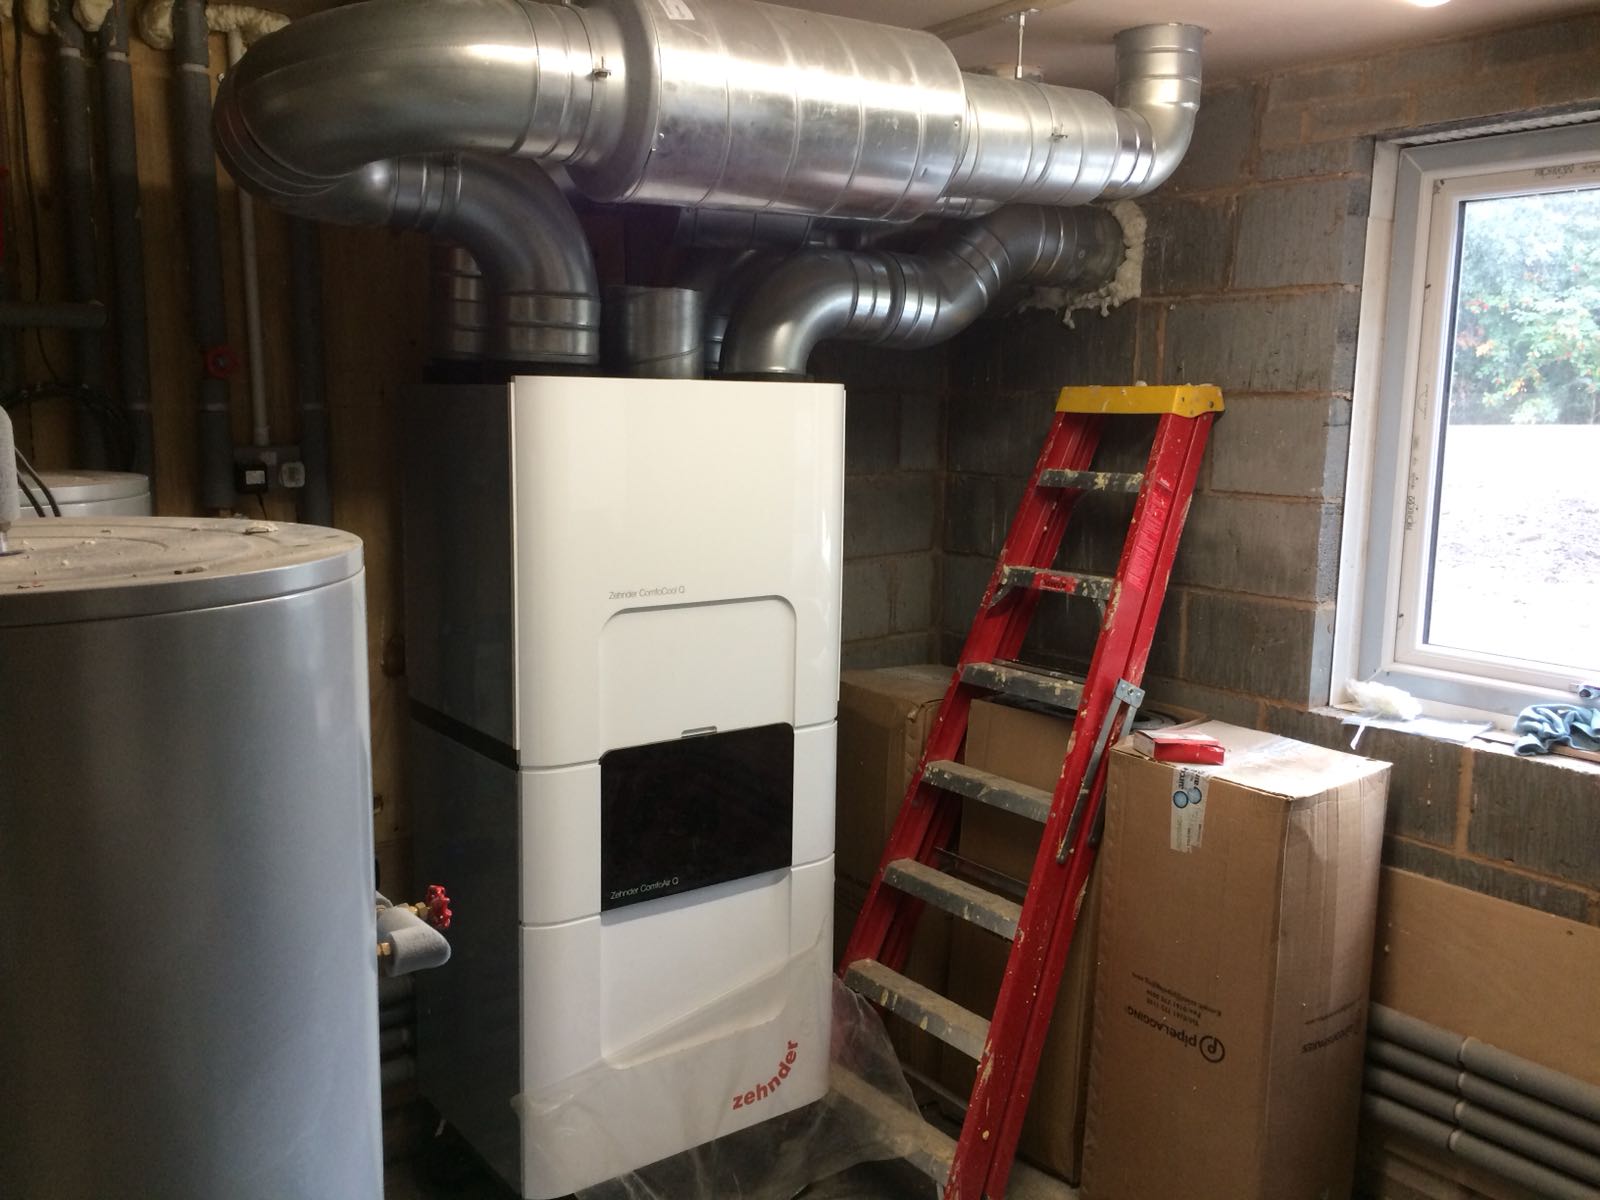 MVHR with ComfoCool installed in a residential home showing spacing requirements